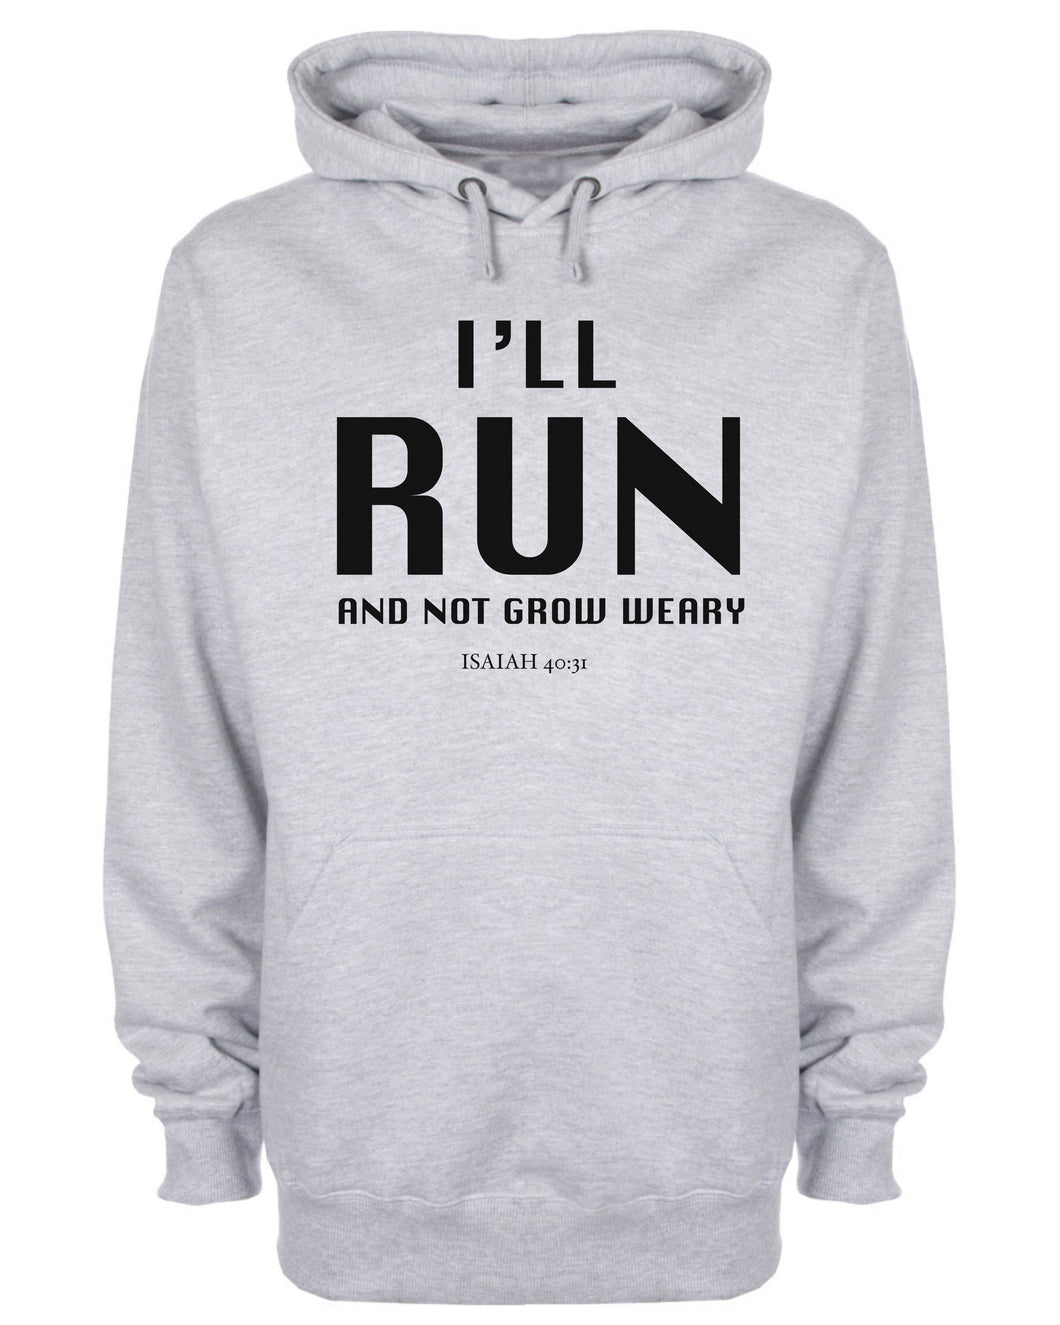 I'LL Run and Not Grow Weary Isaiah 40:31 Hoodie Bible Scripture Christian